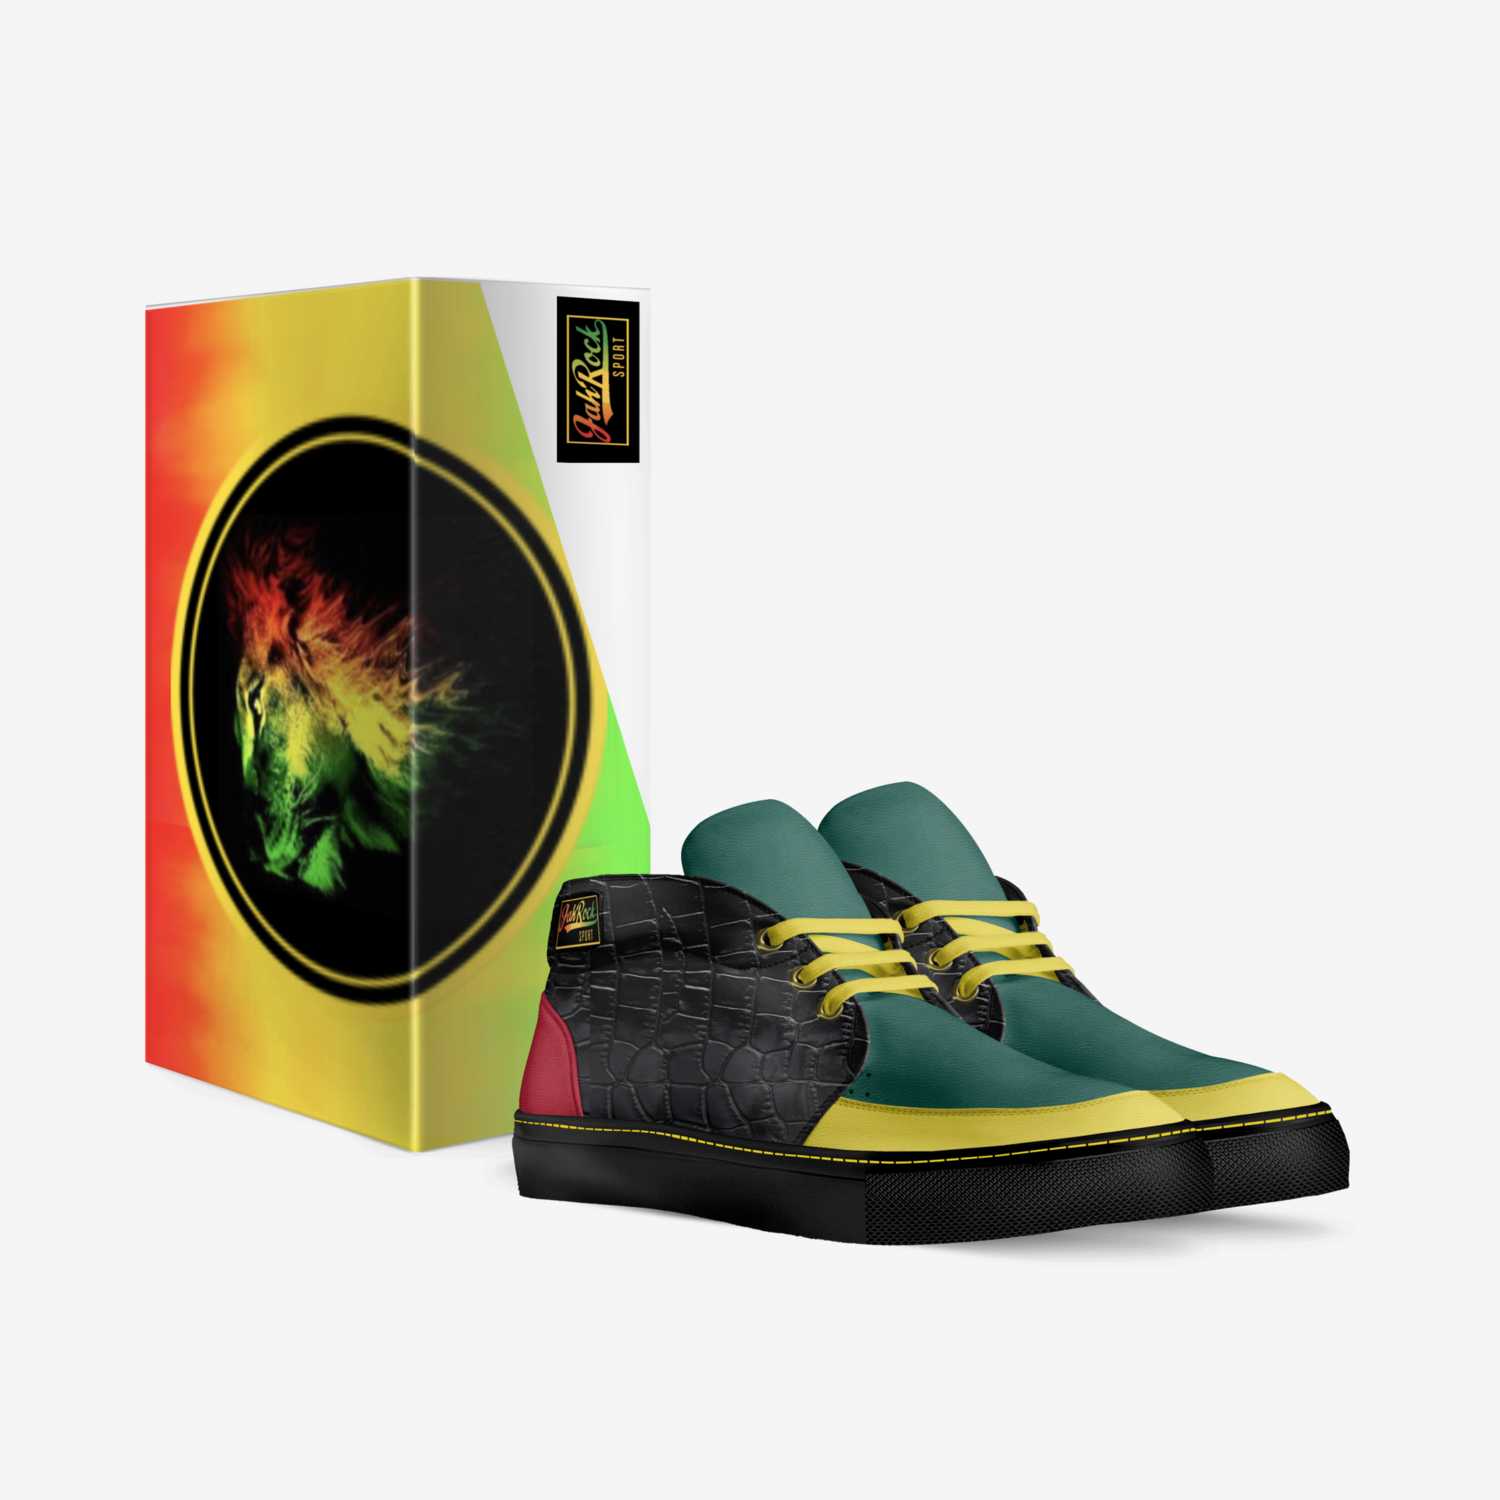 JAH ROCK SPORT custom made in Italy shoes by Shahn W Mitchell | Box view